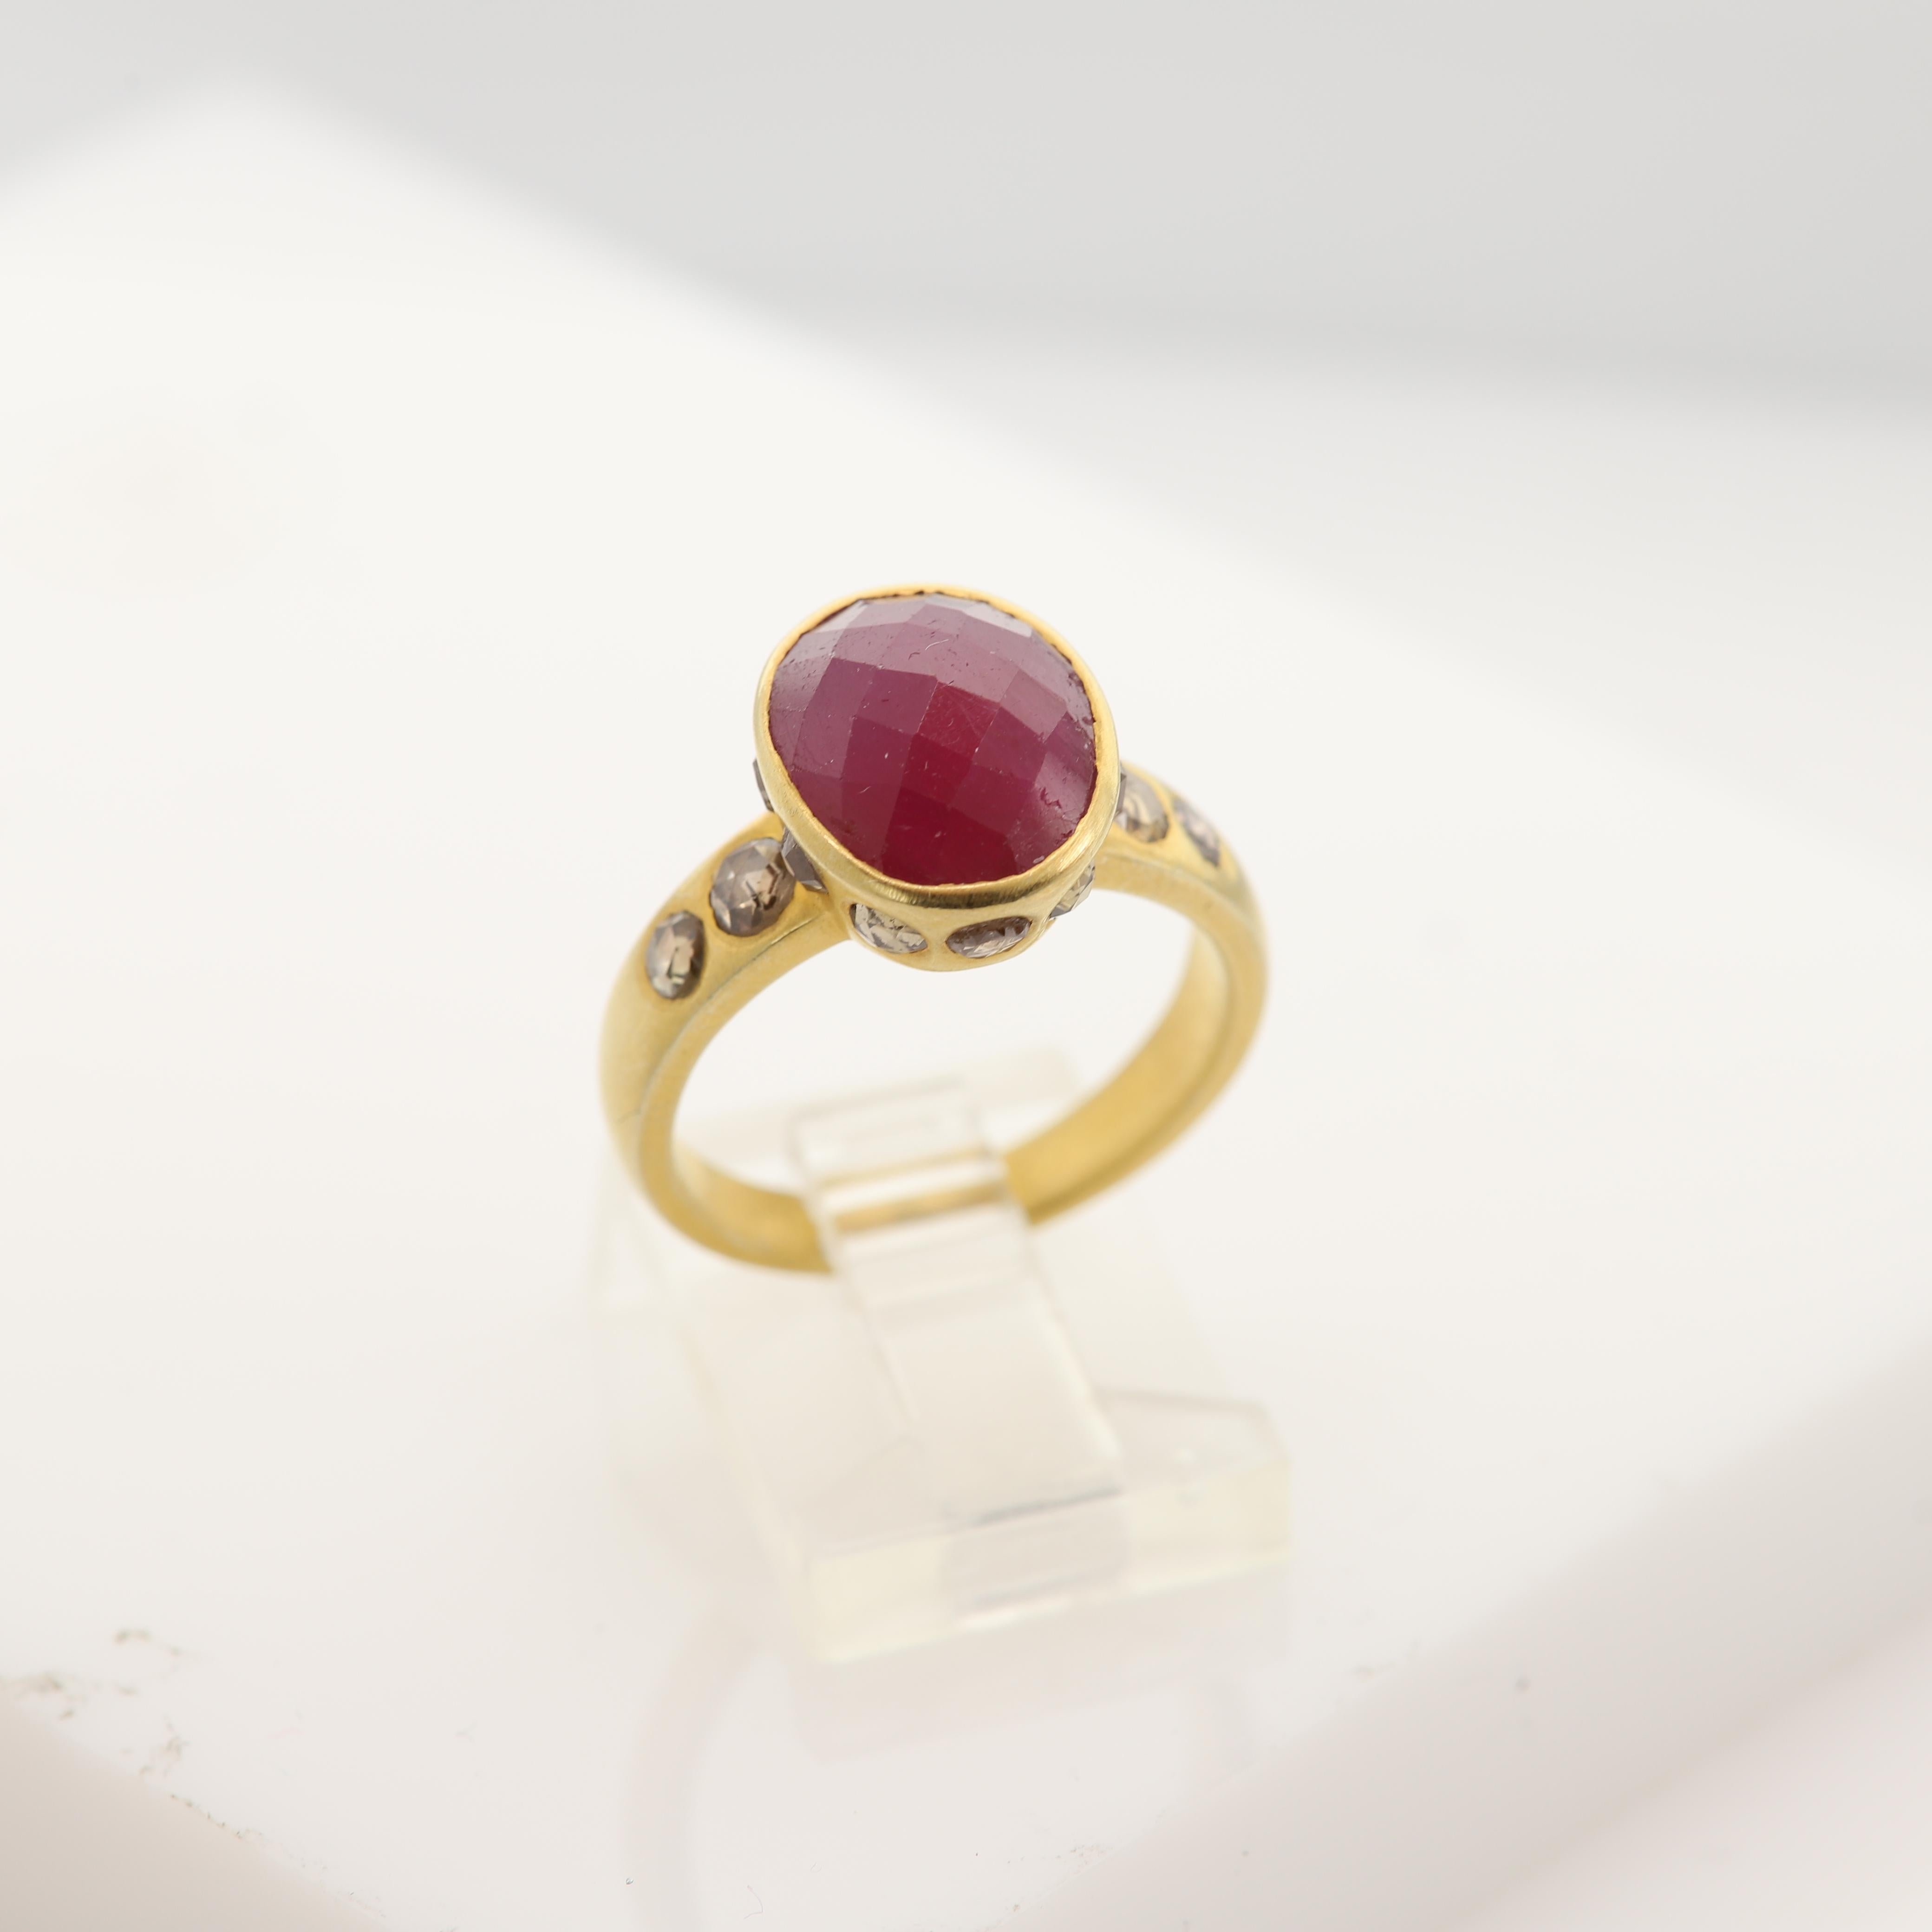 NEW
Vintage Ruby & Diamonds - Hand Made in Italy
18k Yellow Gold 7.0 grams 
Ruby 4.0 Carat Oval shape and checkered cut,  approx size 12 x 10 mm Dark Red Tone & Bezel set
Old Cut Champagne /Light Brown Diamonds on the sides 0.90 carat
Finger size